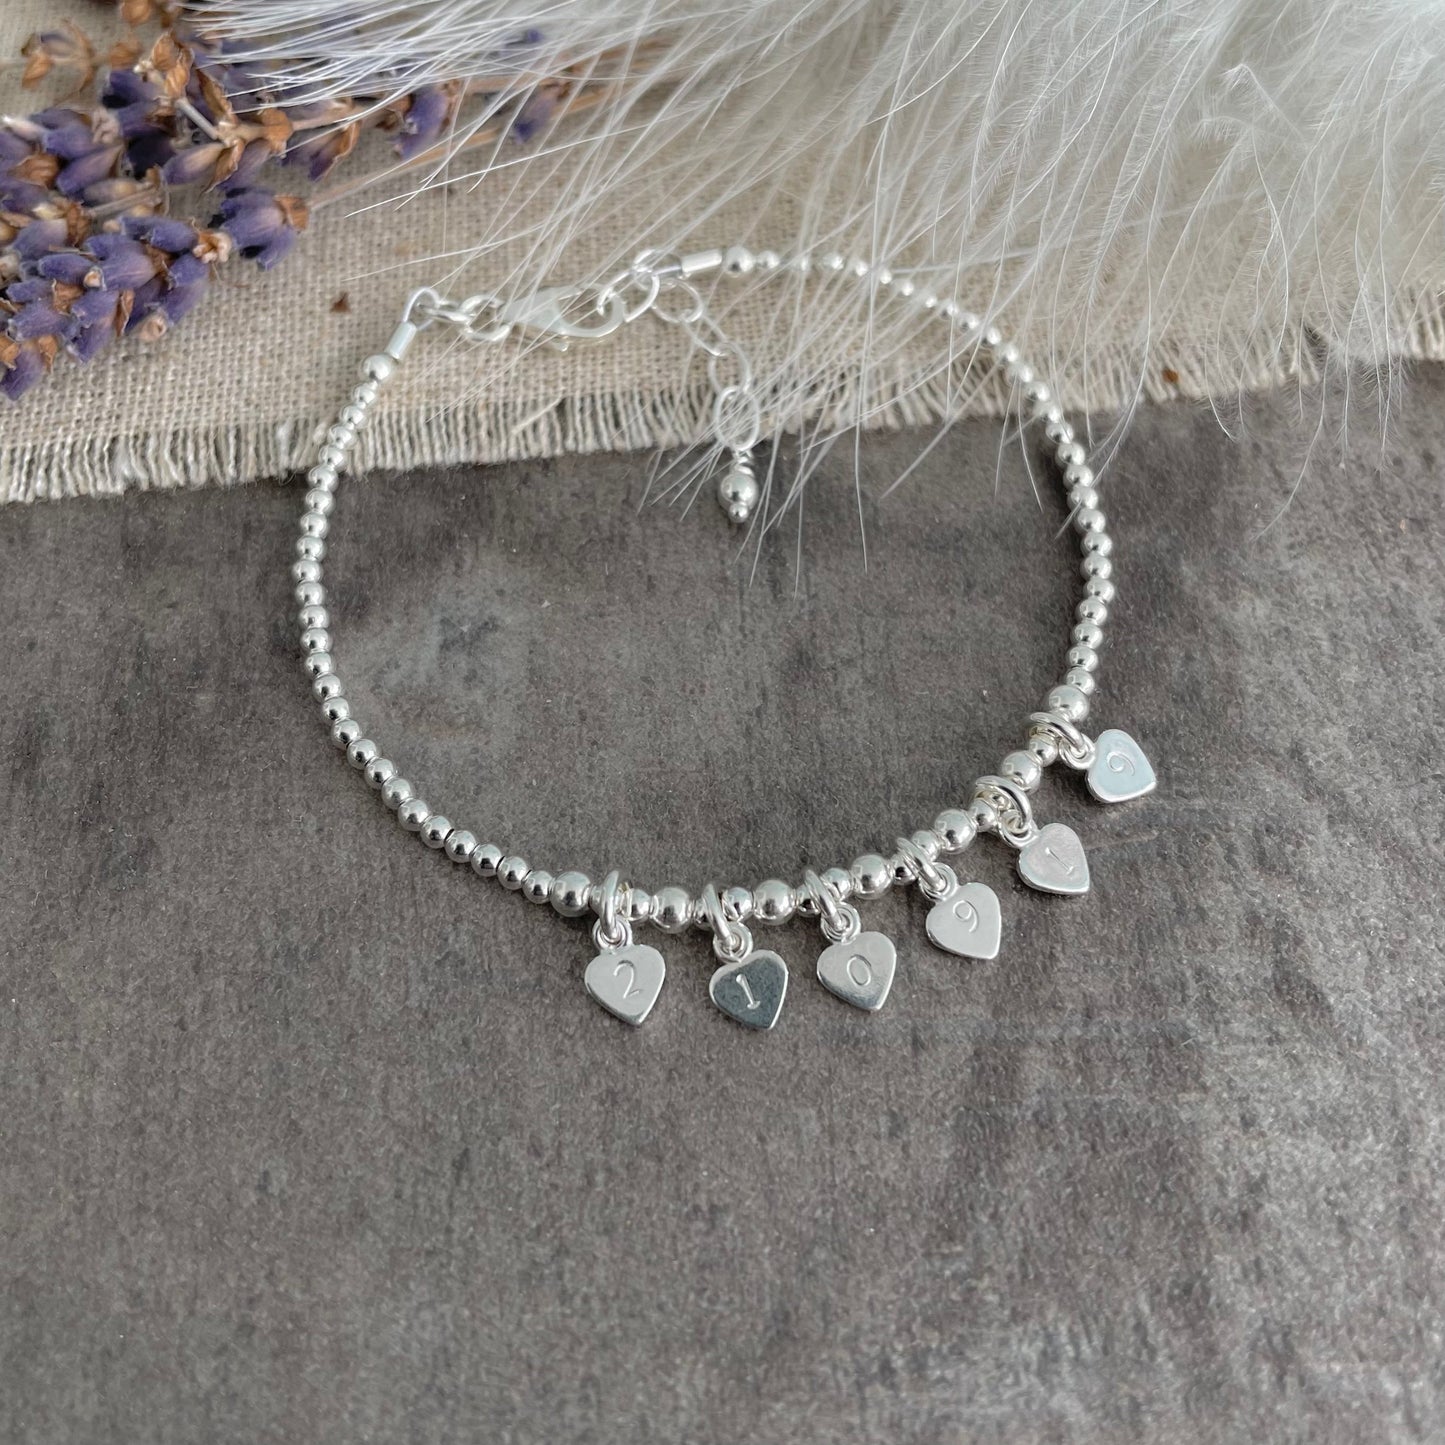 Wedding Date Bracelet, Gift for bride, Anniversary Gift, Wedding Day Jewellery in Sterling Silver